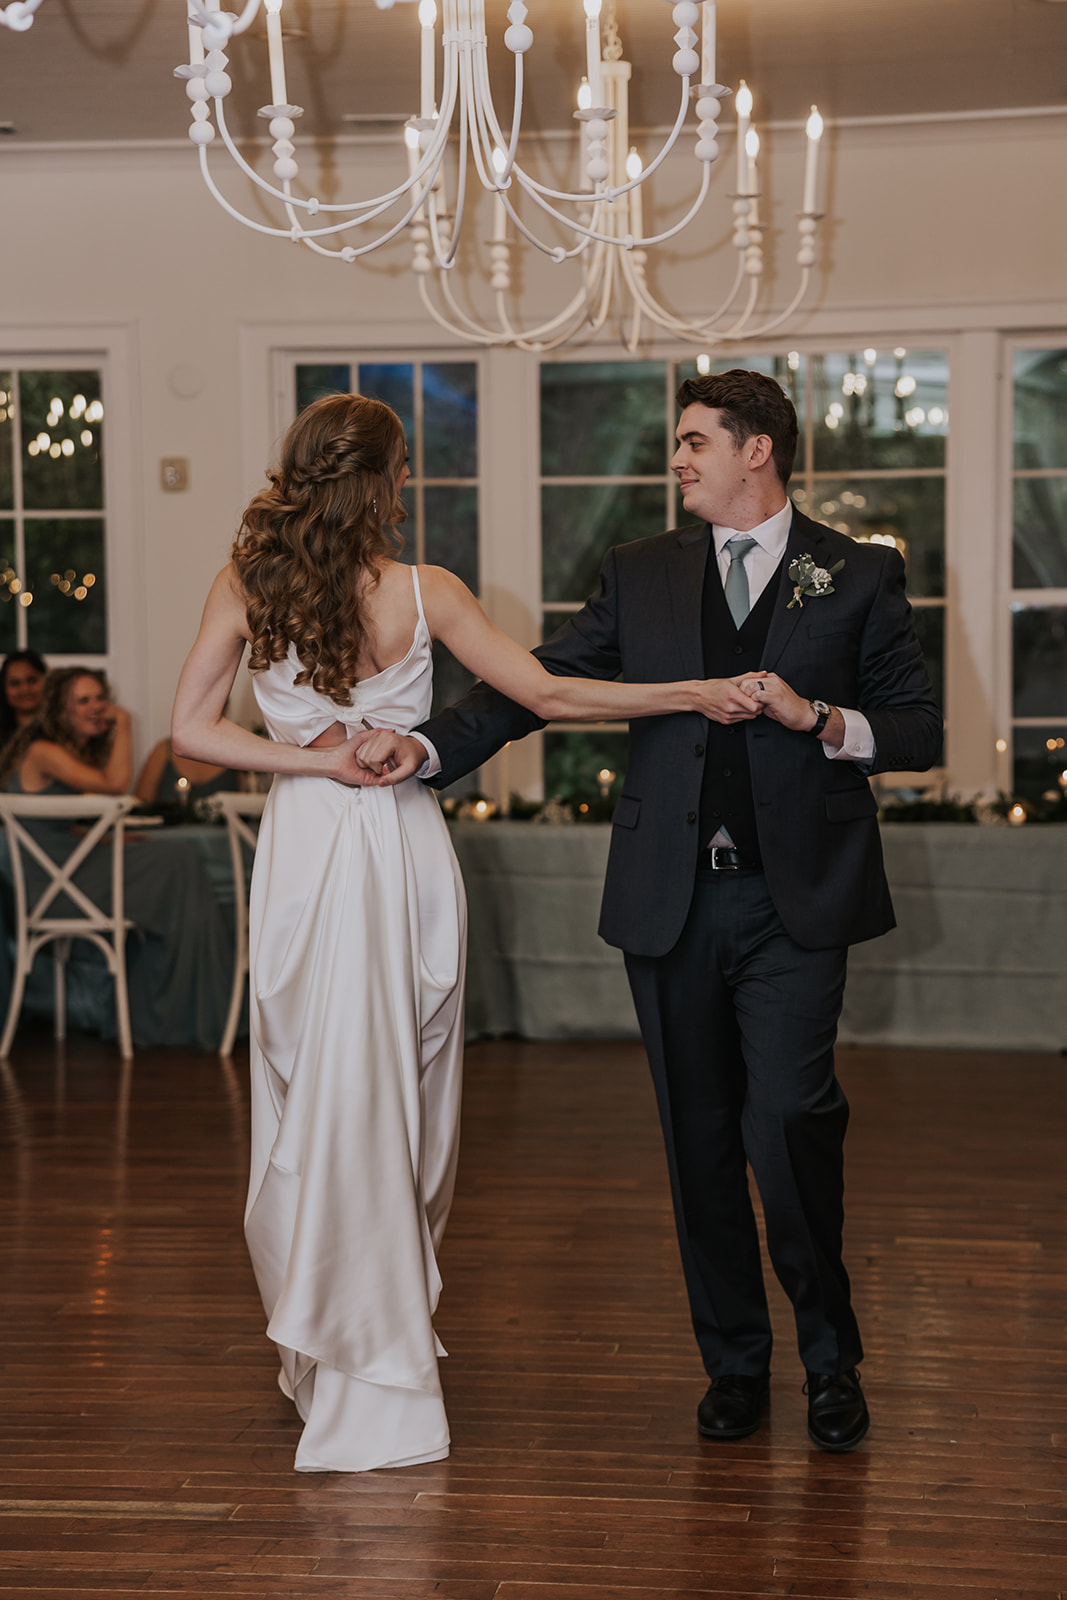 Bride and groom share their first dance together